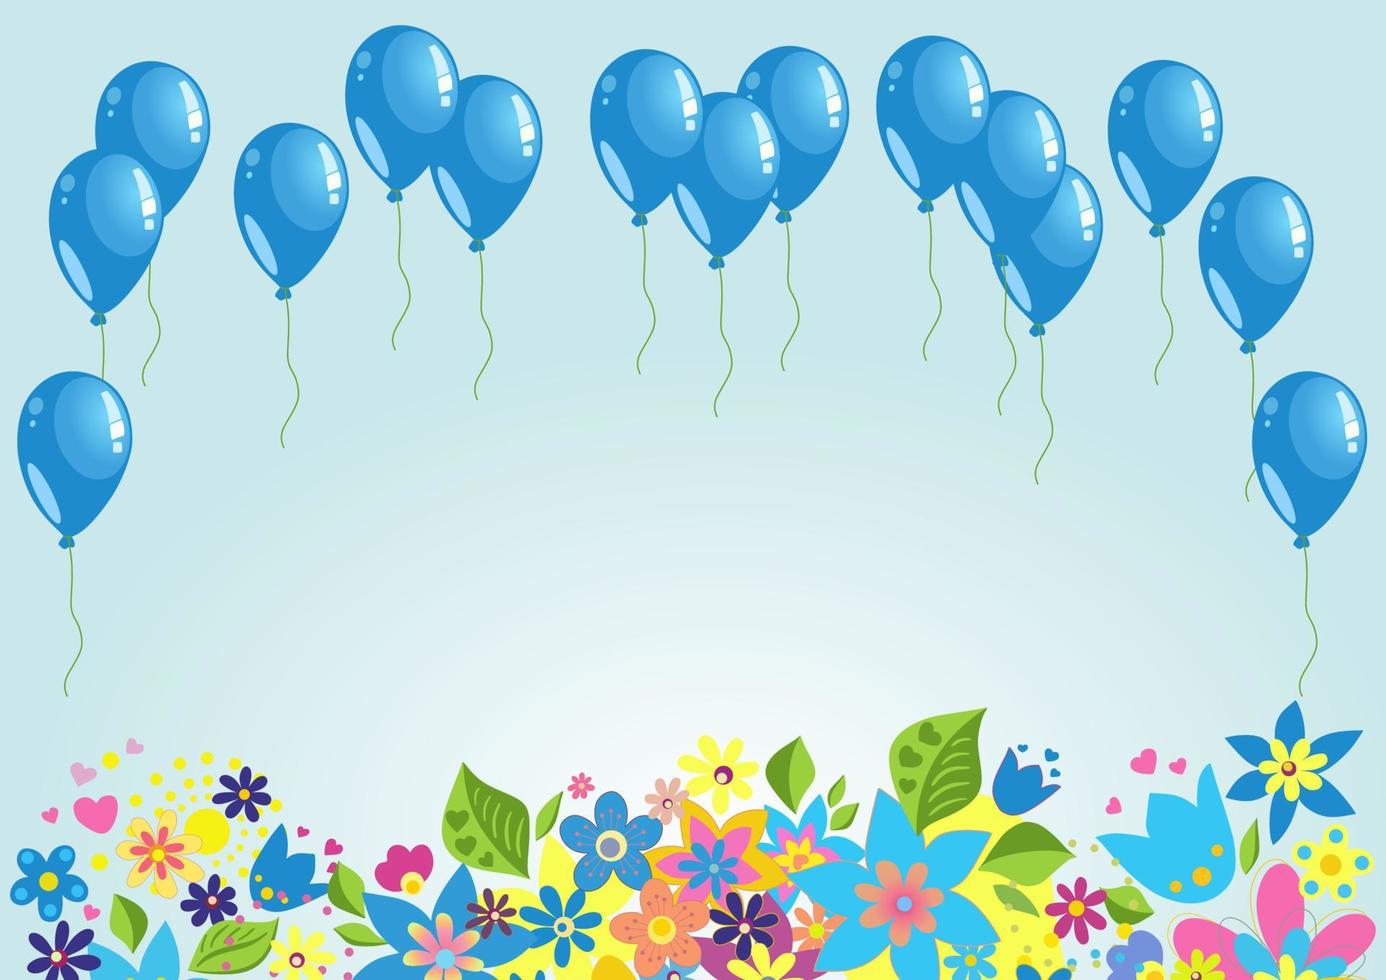 Flying blue balloons on nature background. Birthday boy balloons flying over grass and flowers on sky backdrop. holiday theme with balloons. illustration can be used for poster, card, website, banners vector